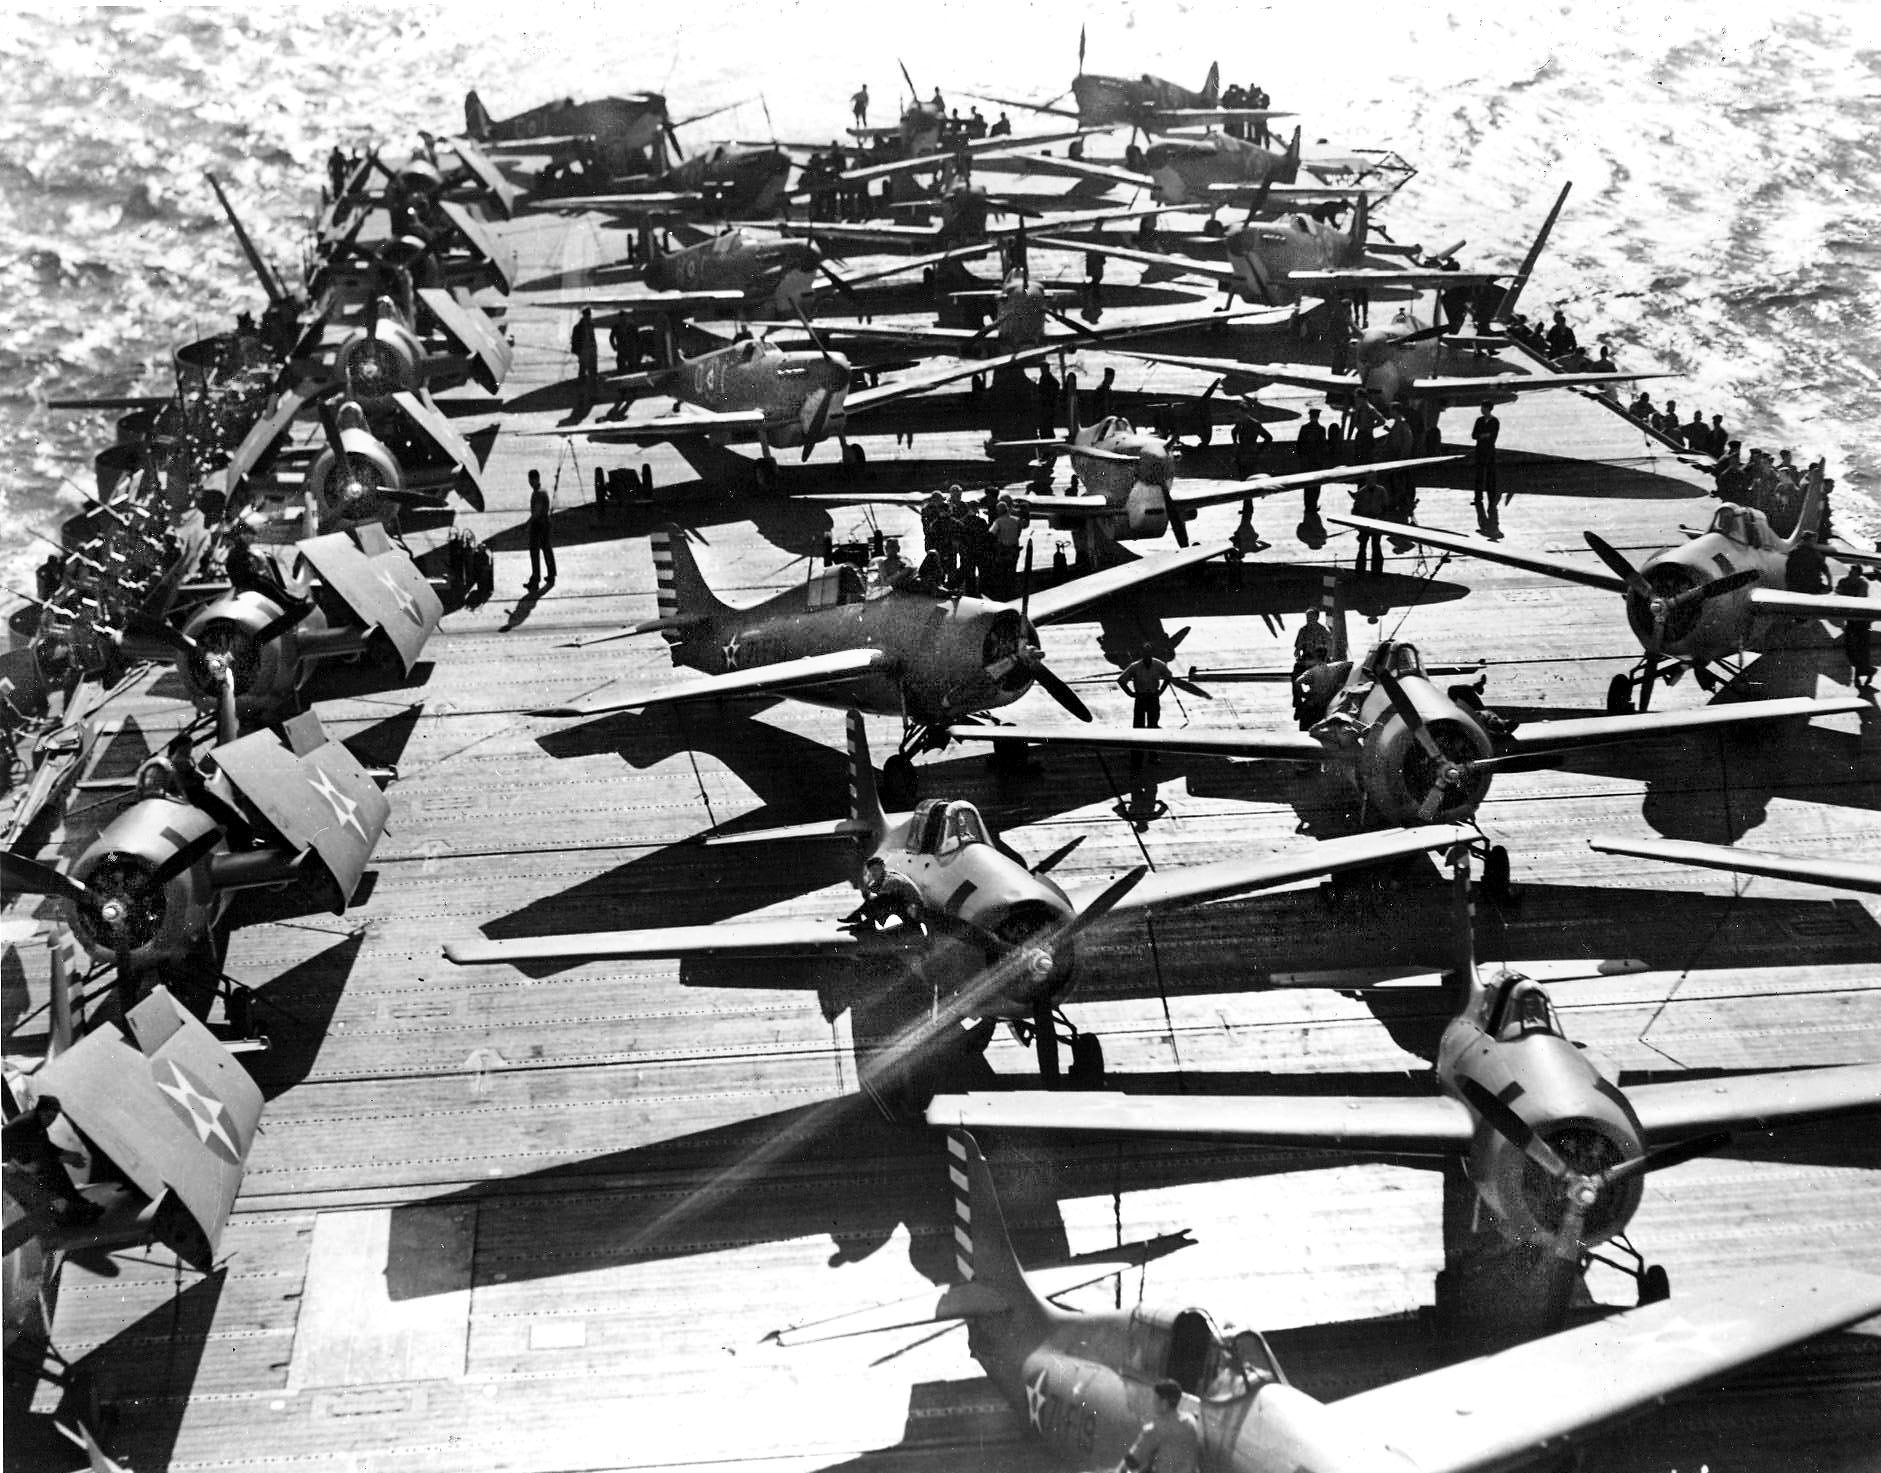 F4F Wildcats from Fighting Squadron 71 (VF-71) are lined up on Wasp’s deck, April 1942. The next month Wasp would ferry Spitfires from Glasgow, Scotland, to Malta in the Mediterranean, where she participated in a joint operation with Britain's Royal Navy to resupply aircraft to that island nation. 